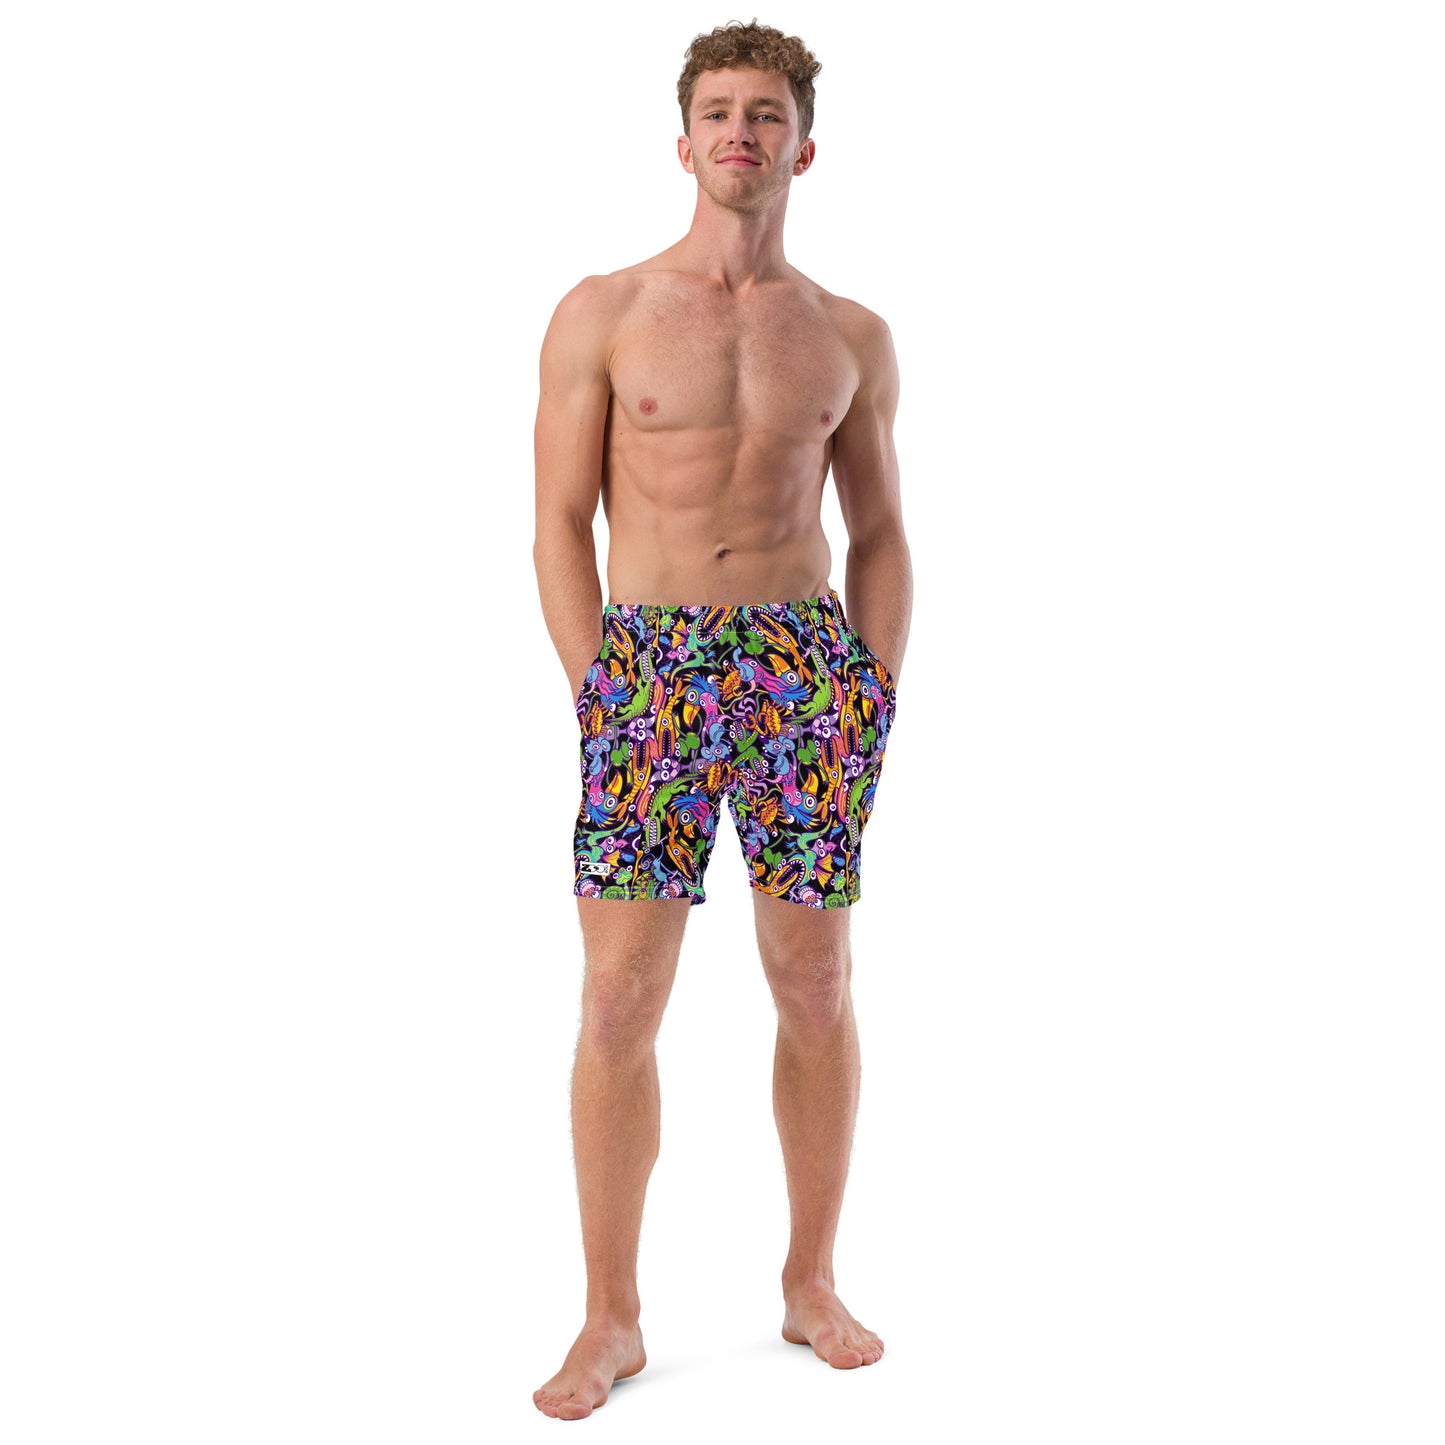 Young man wearing Swim Trunks All-over printed with Eccentric critters in a lively crazy festival